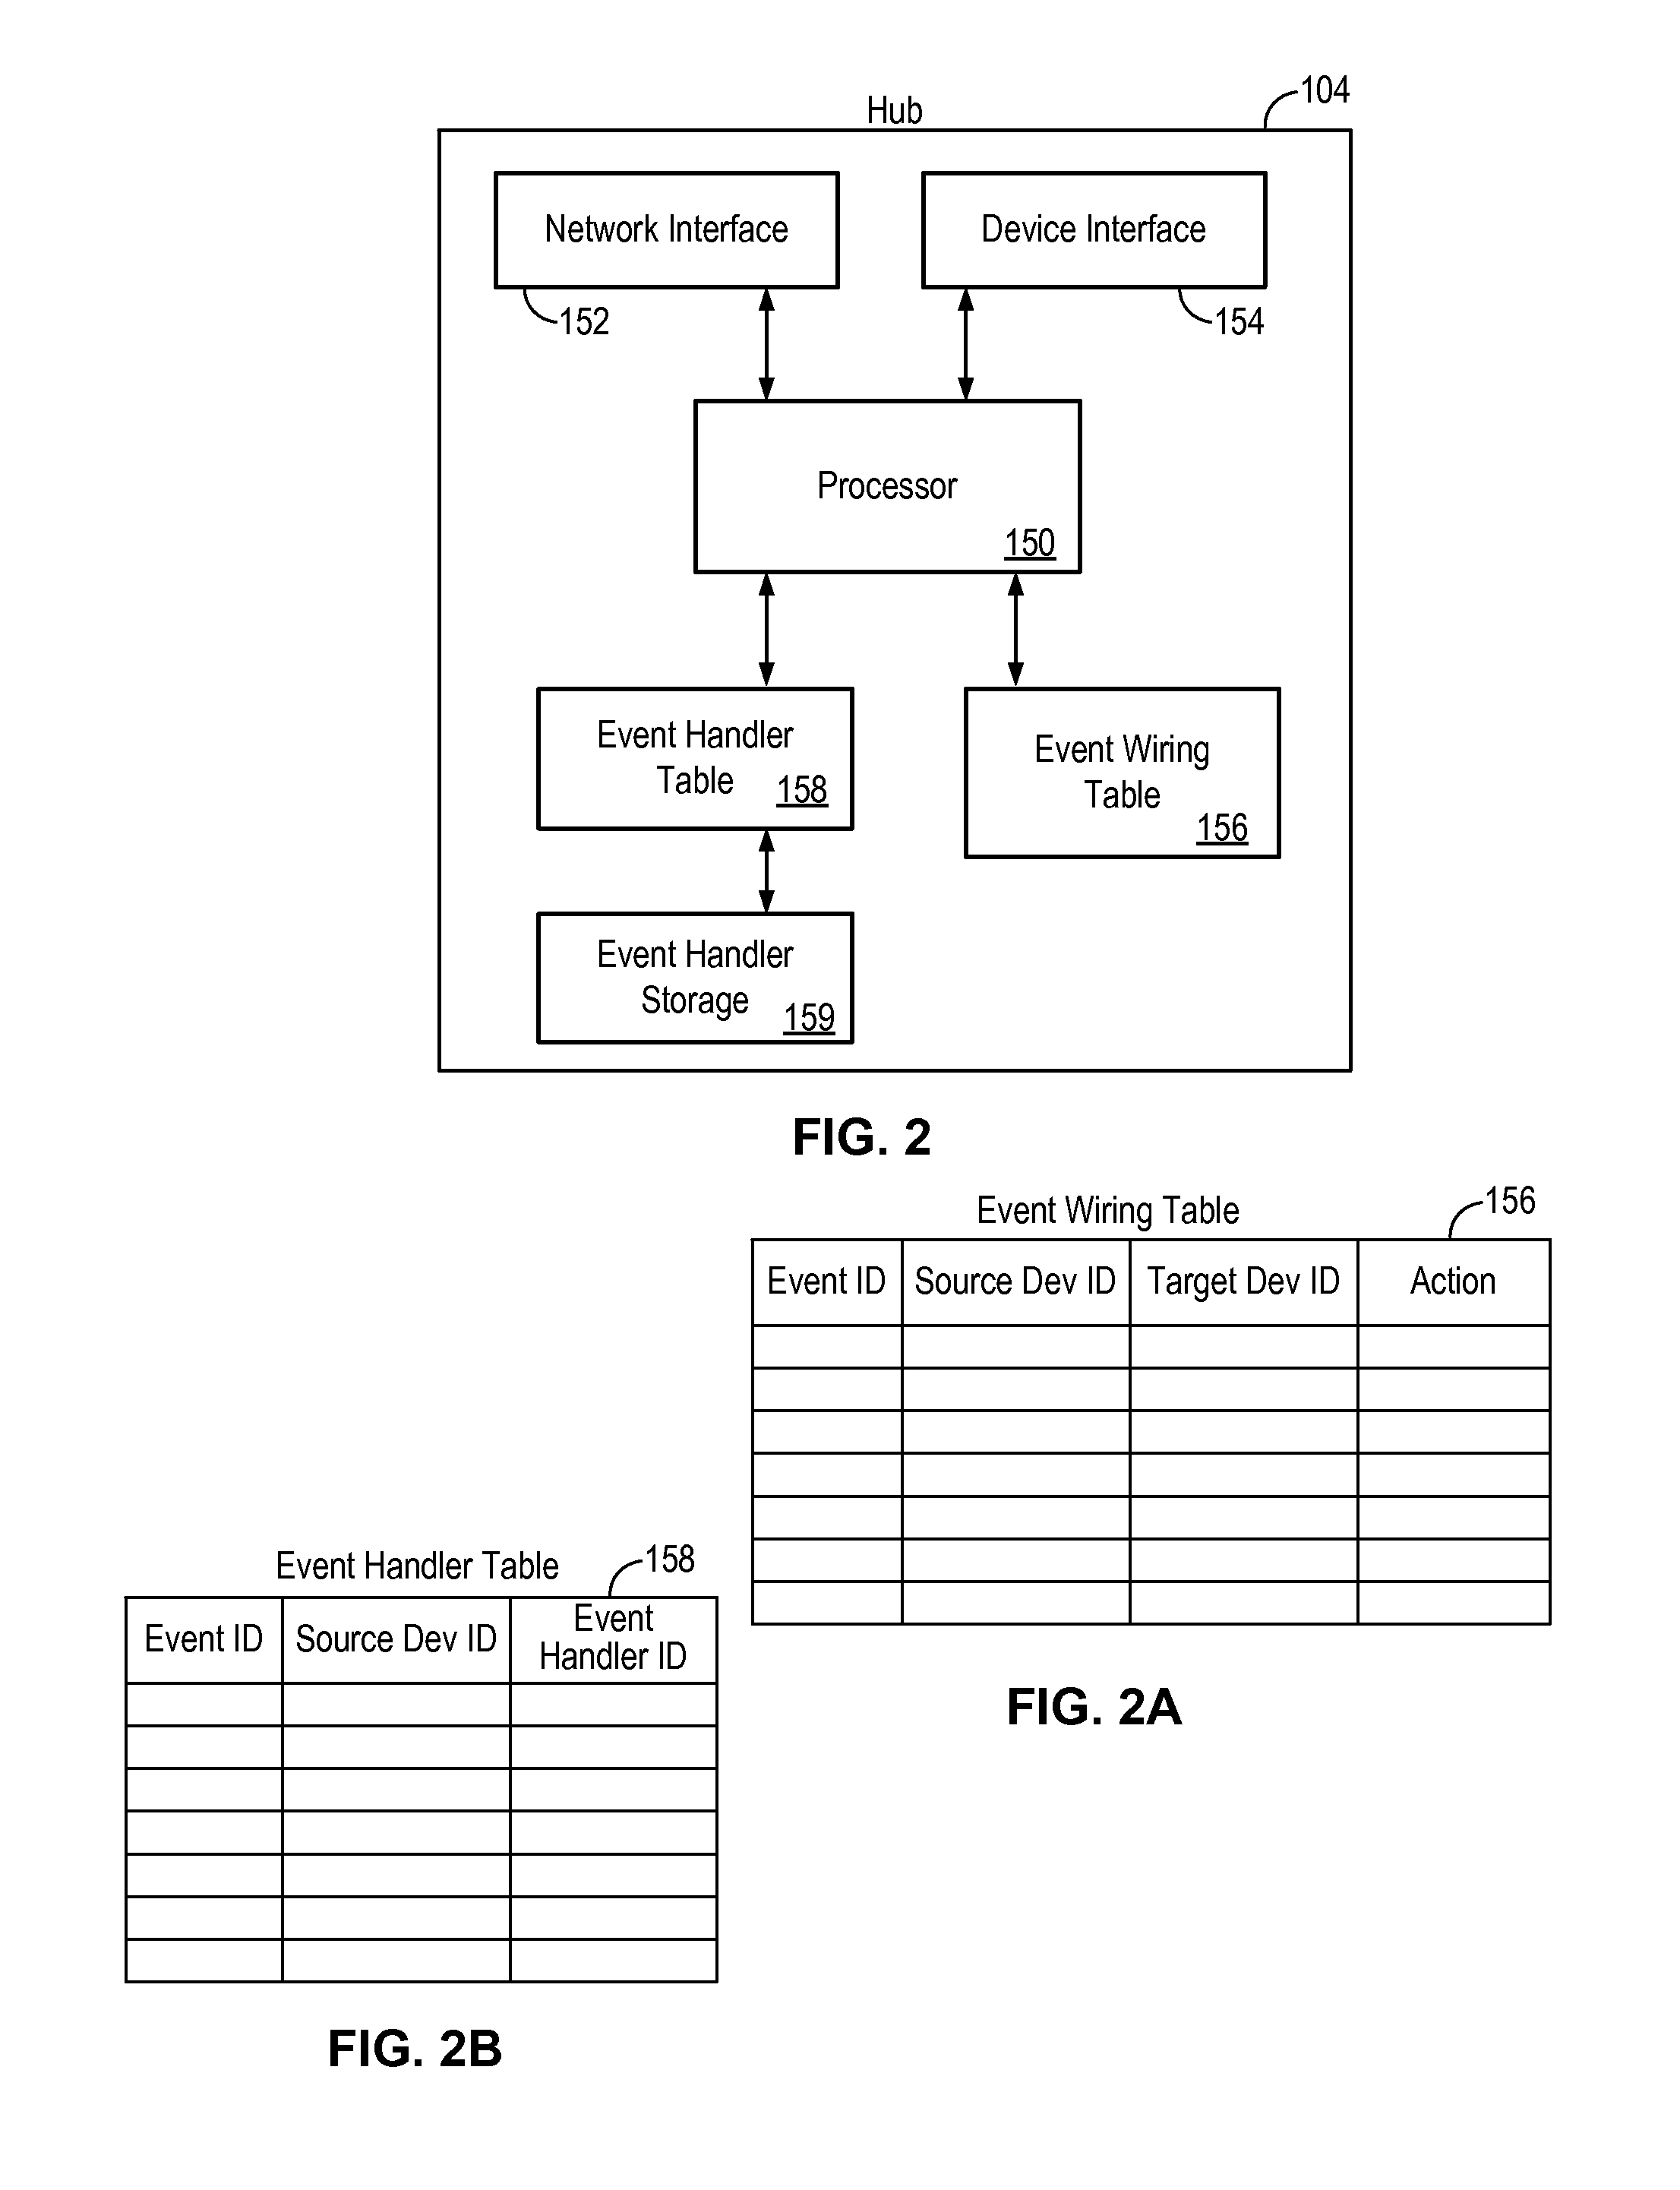 Device-type handlers for remote control and monitoring of devices through a data network